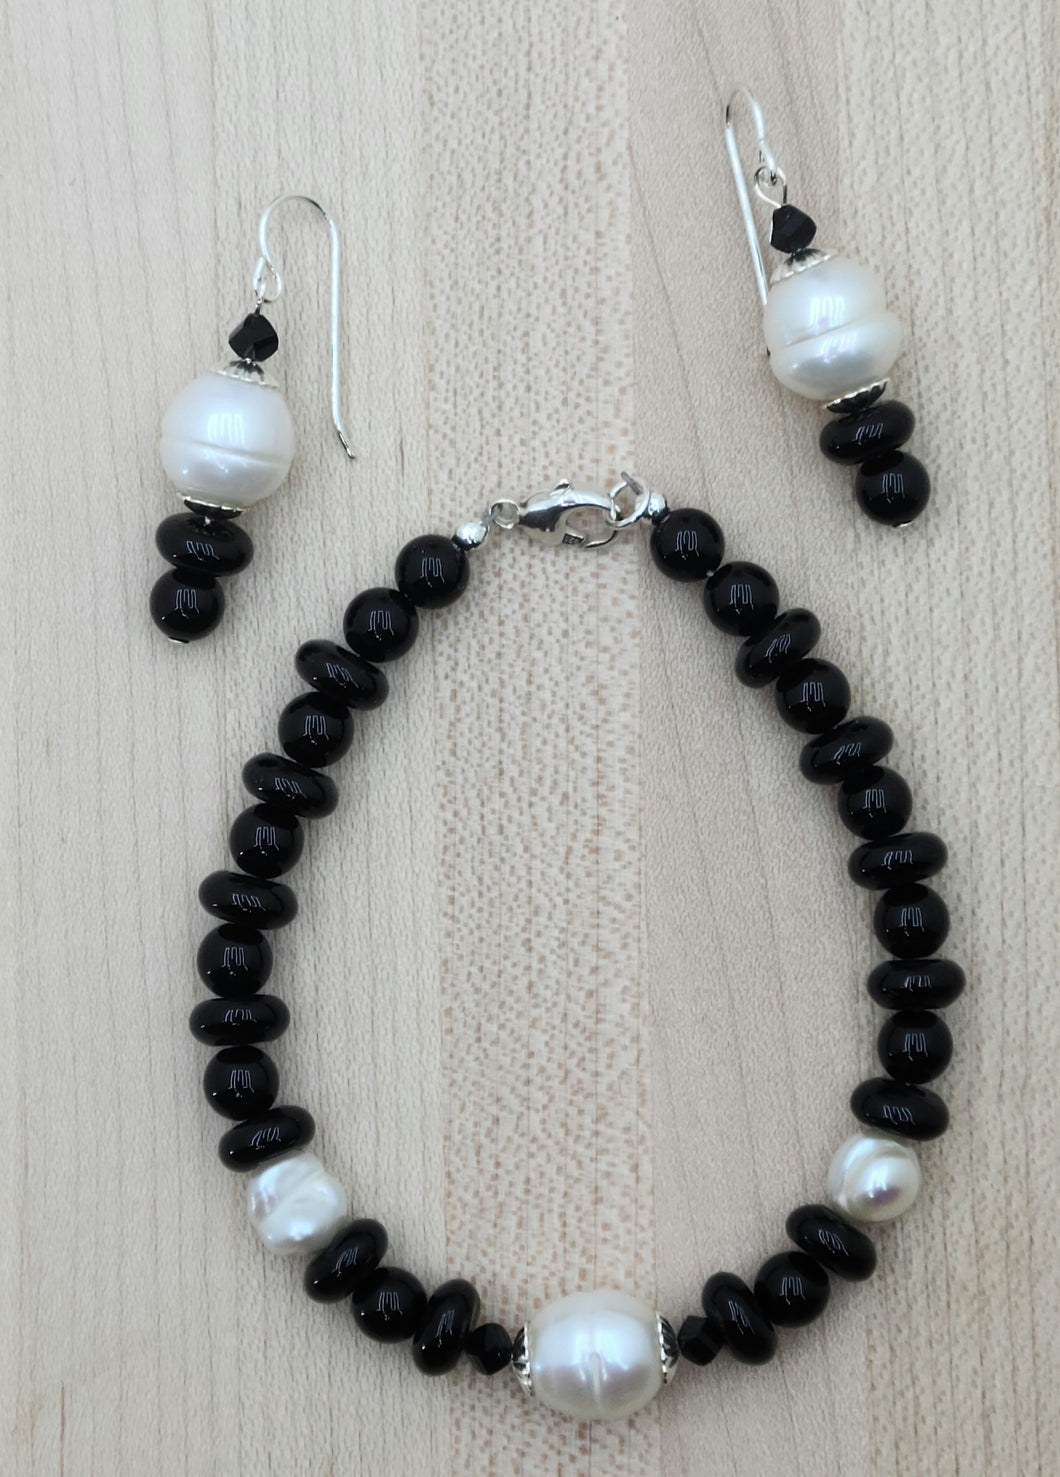 Black onyx & large white baroque freshwater pearls make a stunning contrast in this bracelet & earring duo.